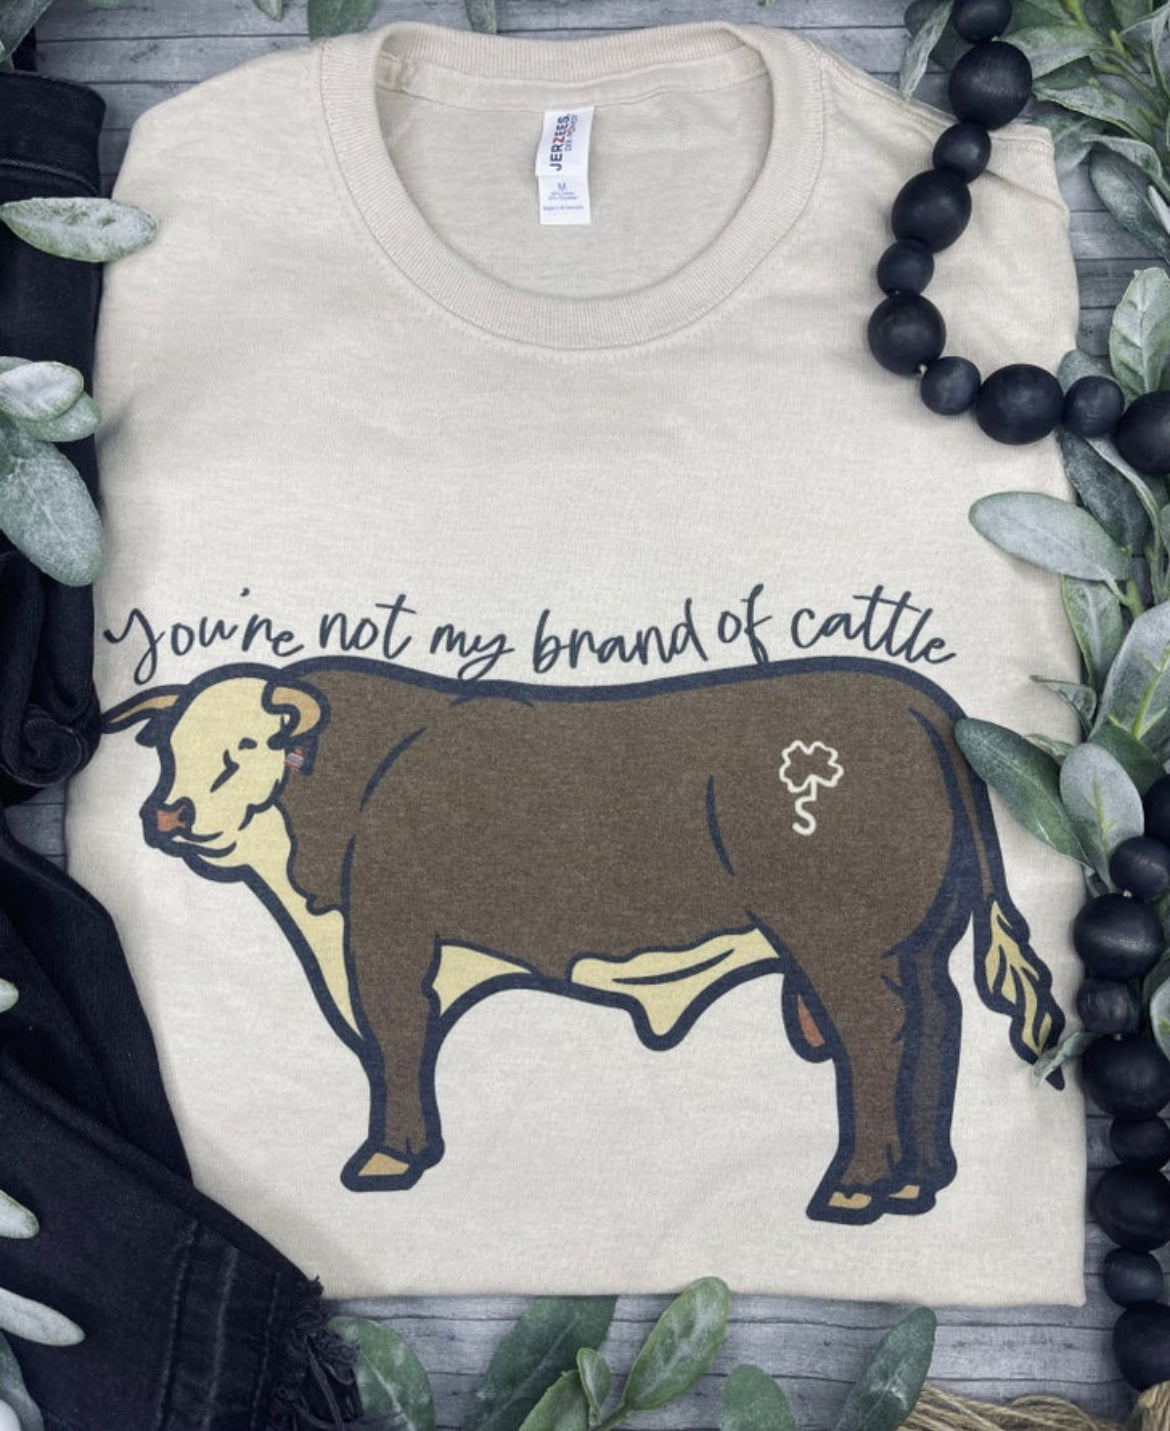 Not My Brand of Cattle Tee